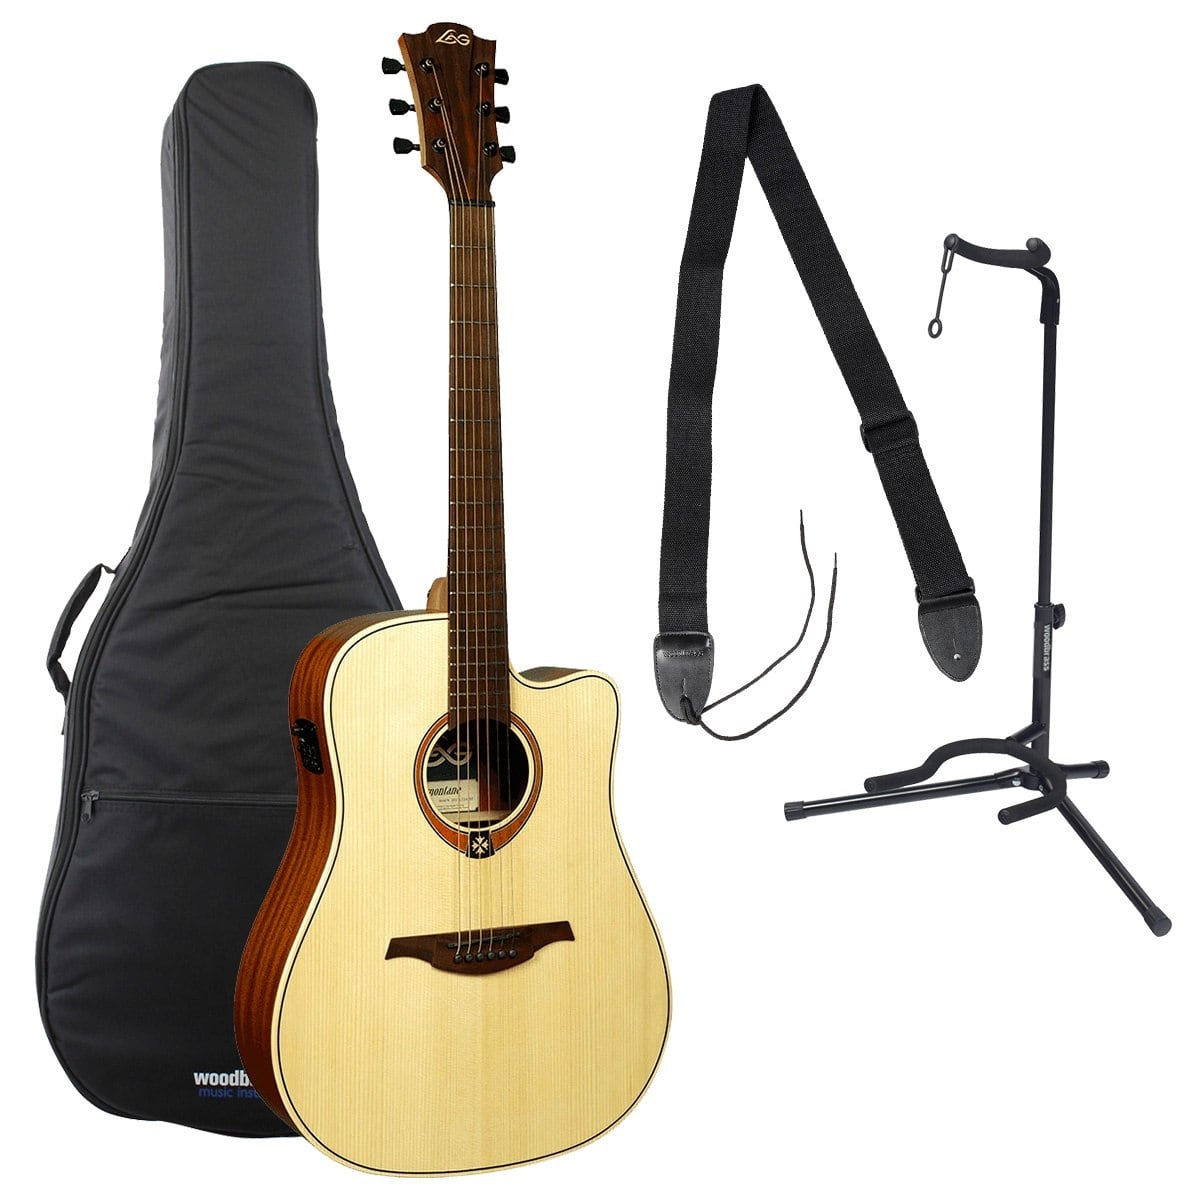 LAG PACK T70DCE TRAMONTANE DREADNOUGHT CUTAWAY ELECTRO | Woodbrass.com